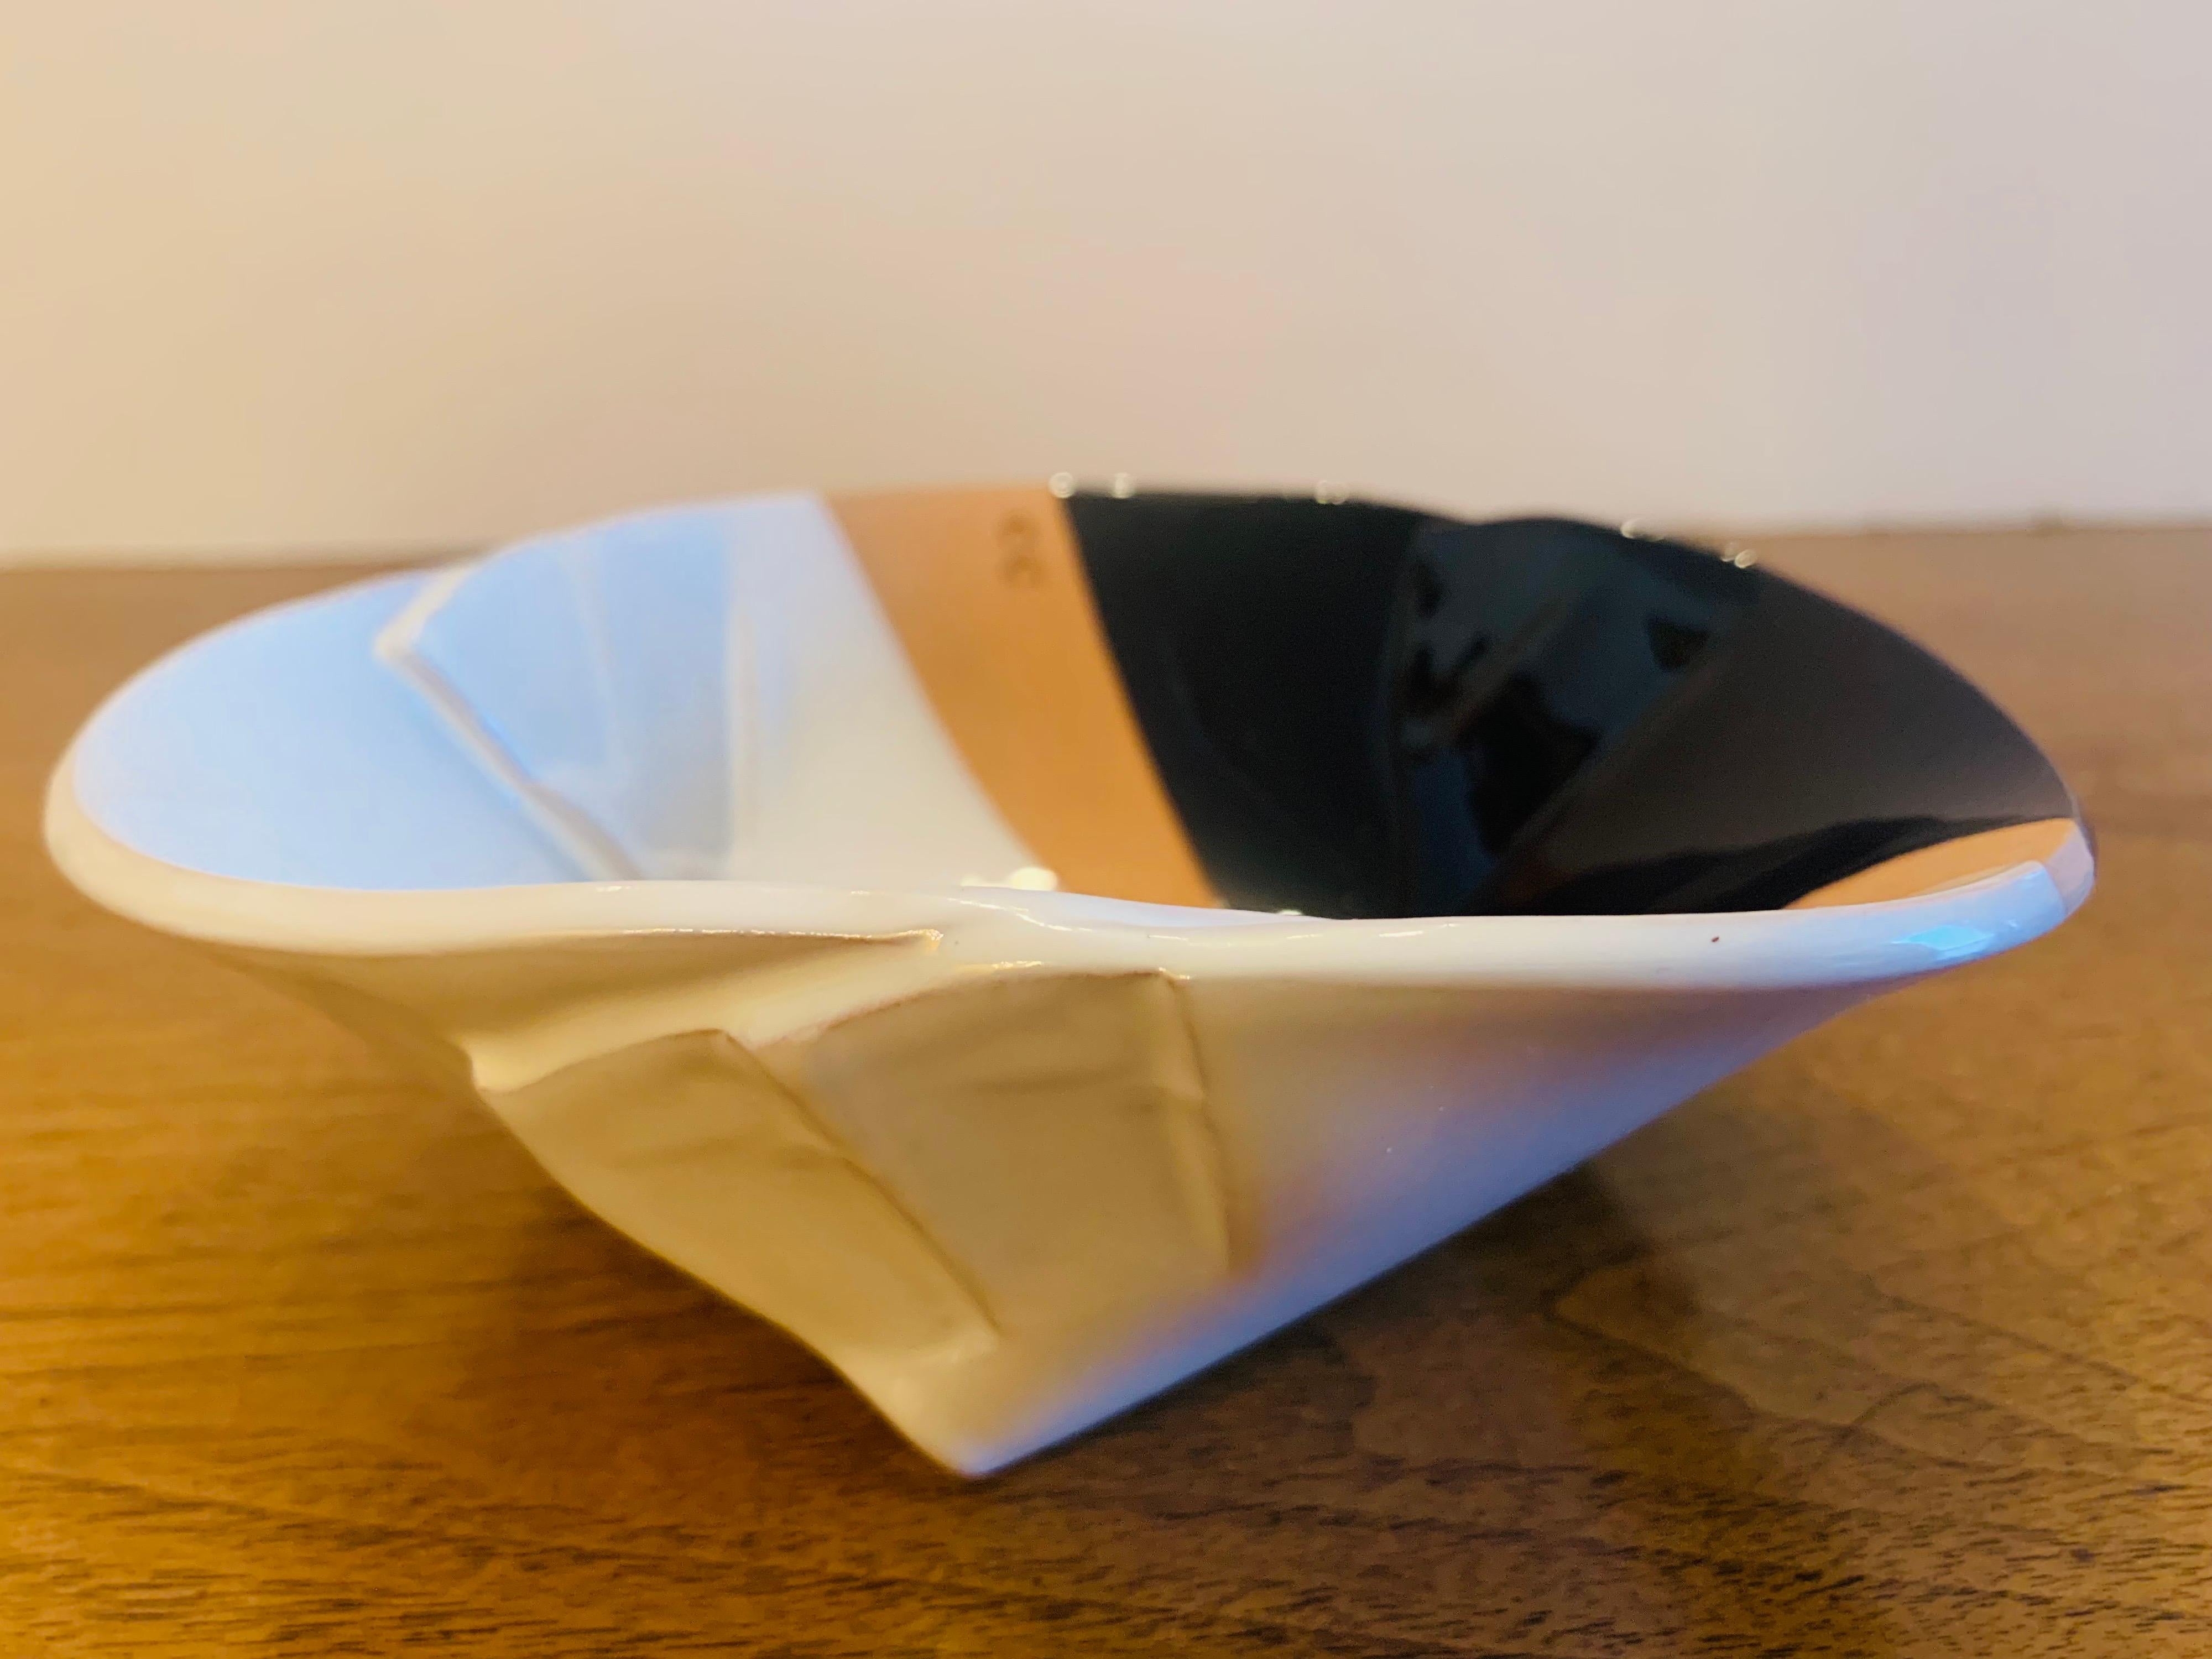 A great Italian Post Modern art pottery bowl by noted artist , Pino Castagna . Signed.
Biography:

Pino Castagna was born in Castelgomberto, Italy, in 1932, and studied in the schools of fine arts of Verona and Venice. Together with Scottish